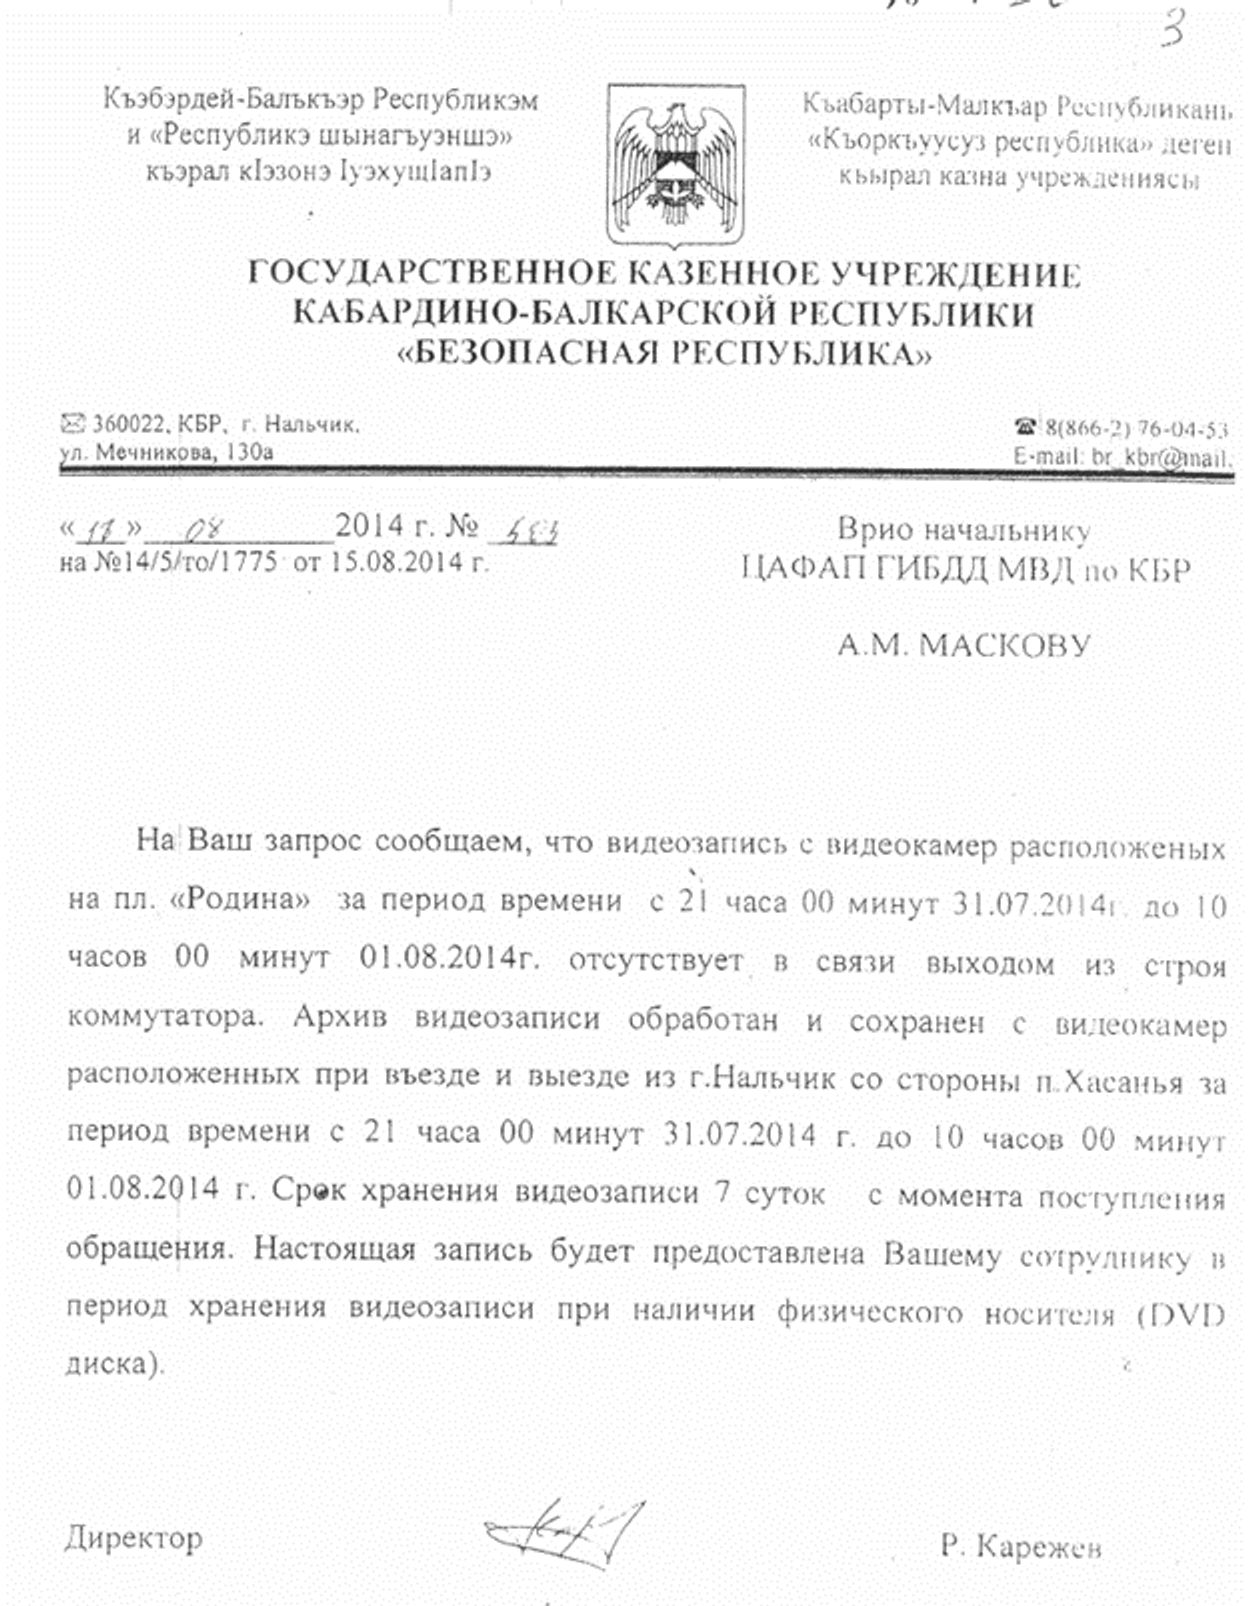 The official reply to the request for CCTV camera footage on the night of Kuashev's death (in Russian)